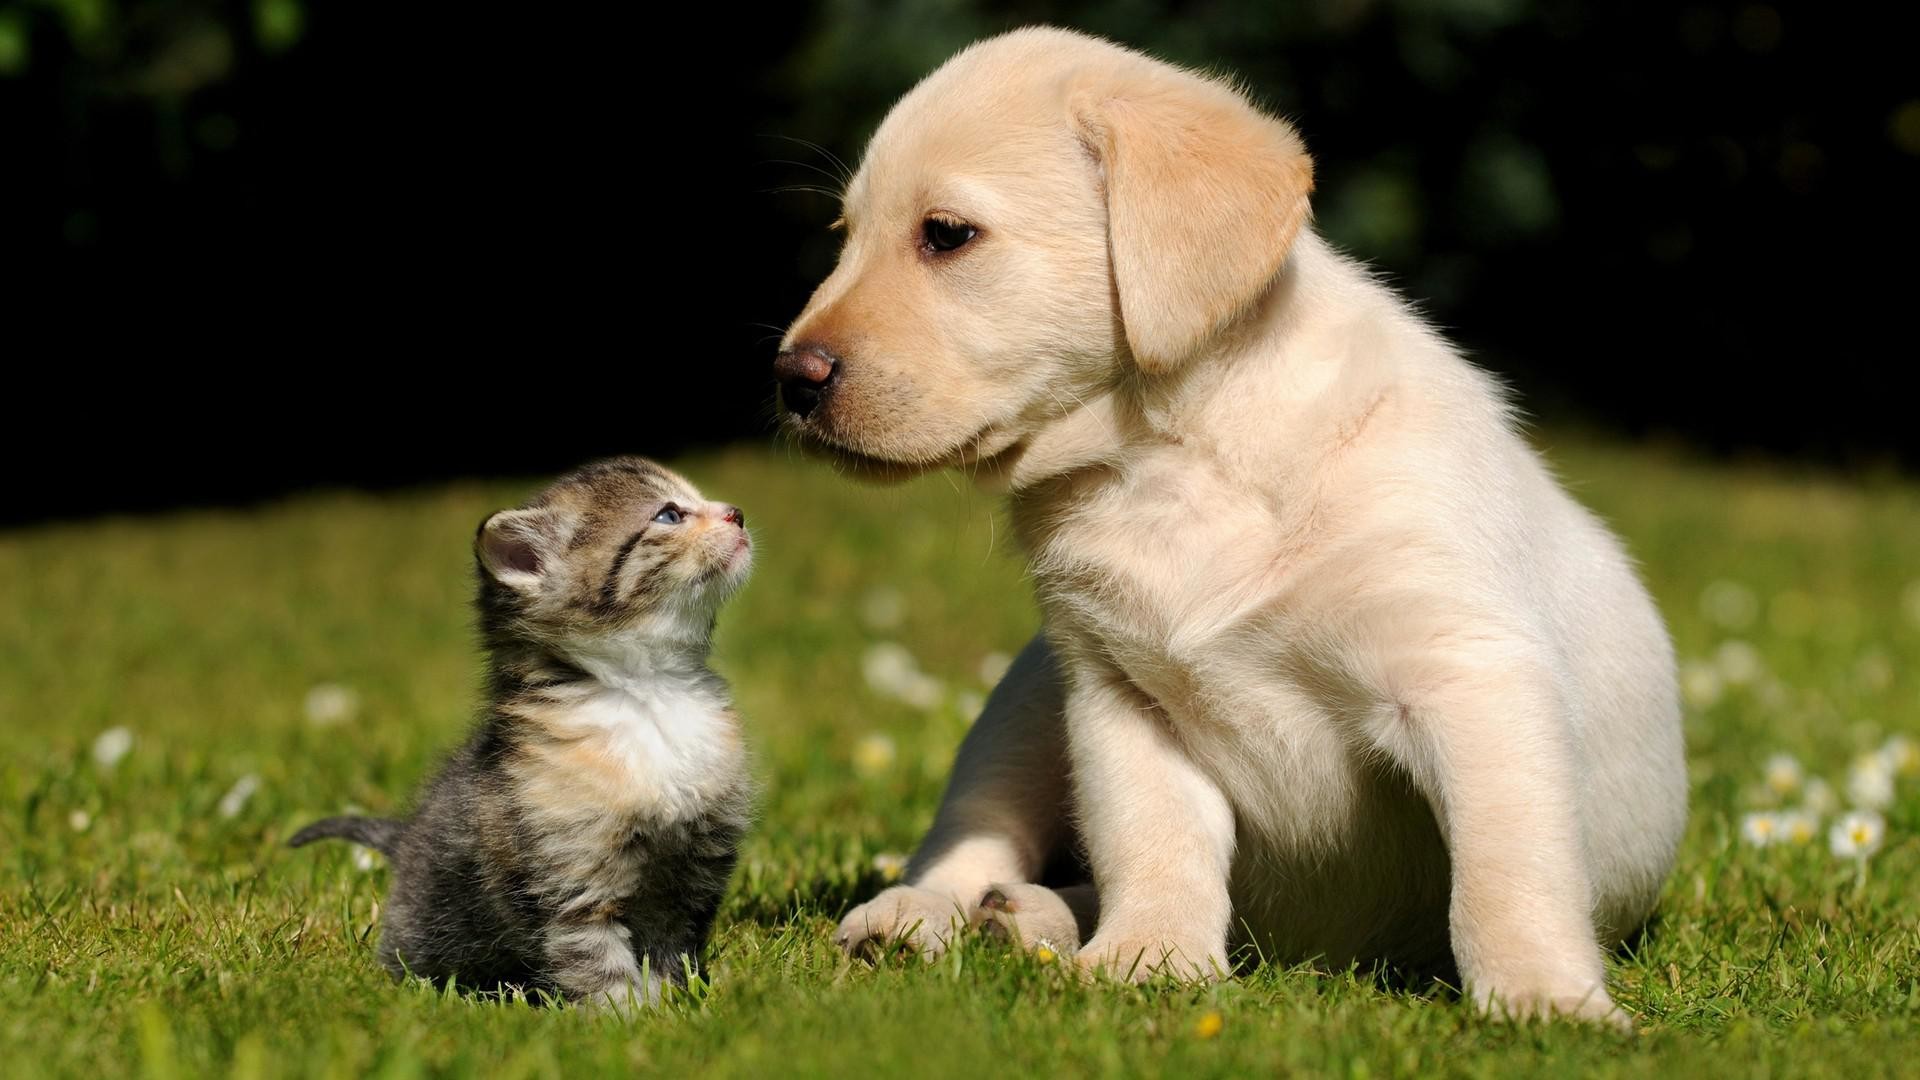 1920x1080 desktop cute dog and cat pictures with captions download